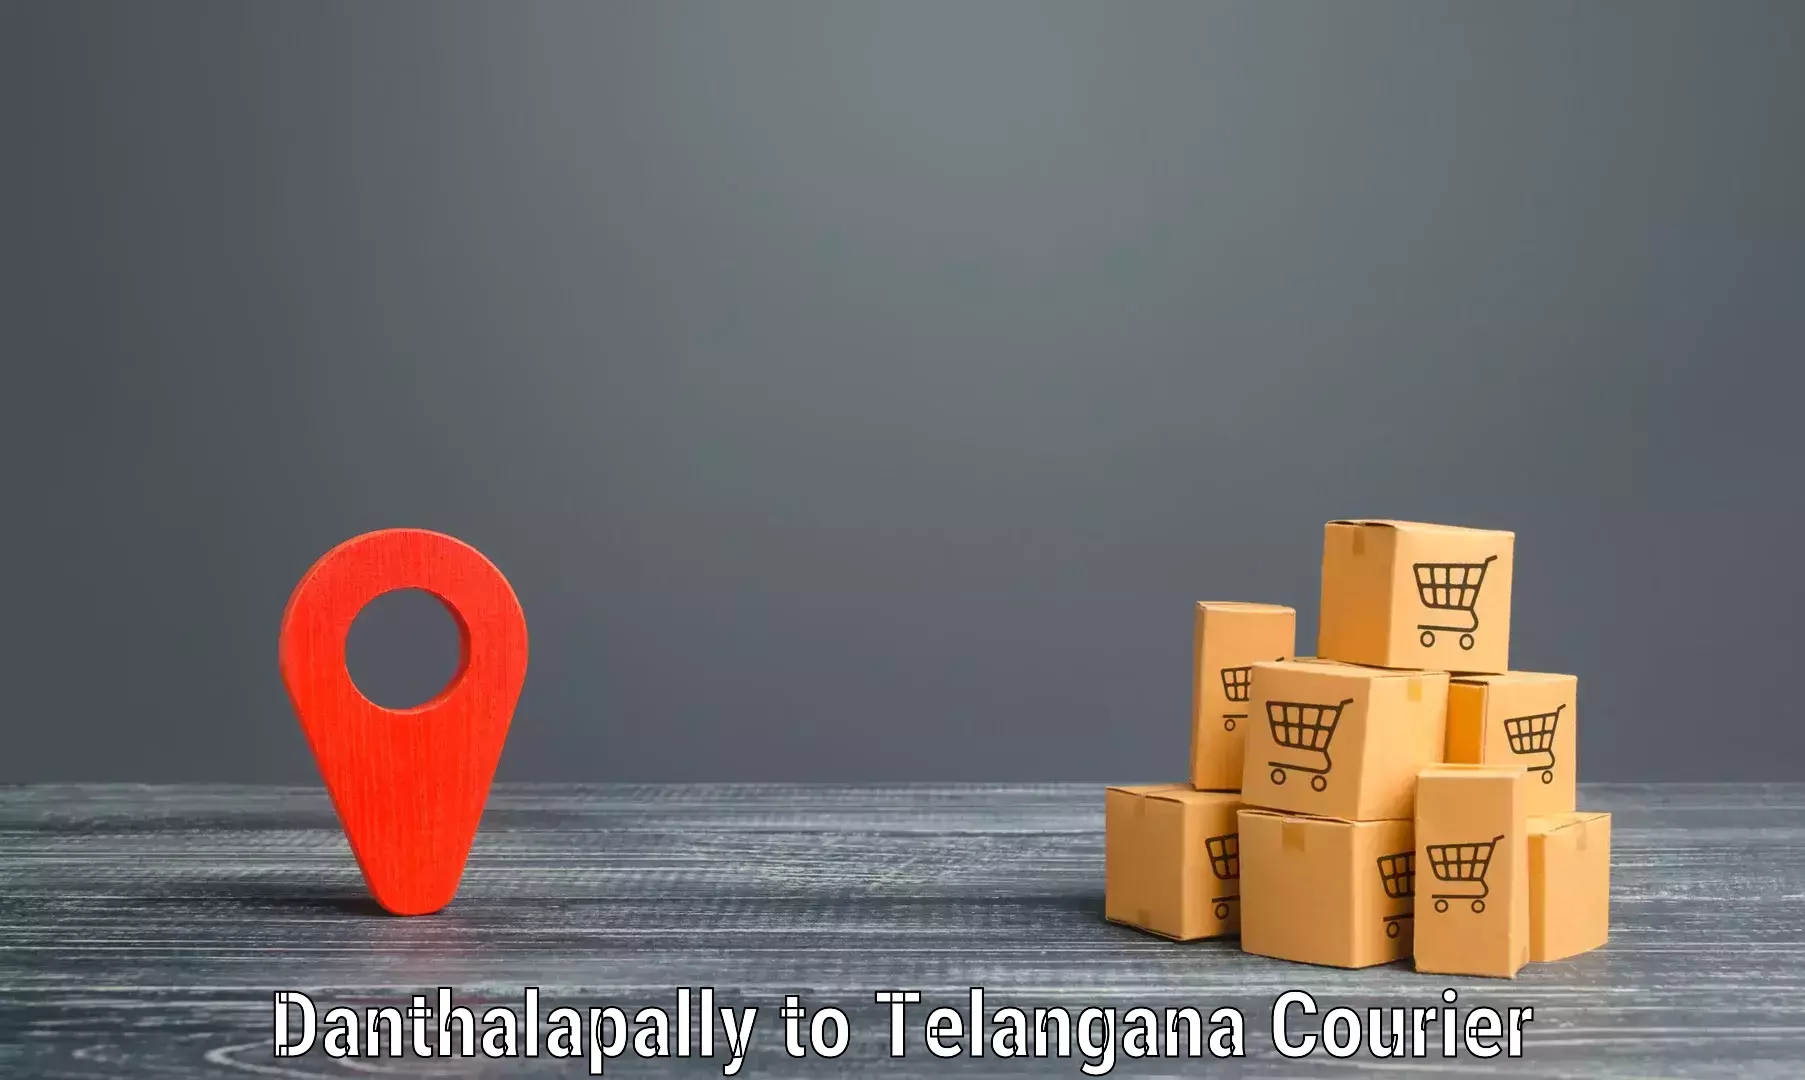 Advanced delivery solutions Danthalapally to Yellareddy